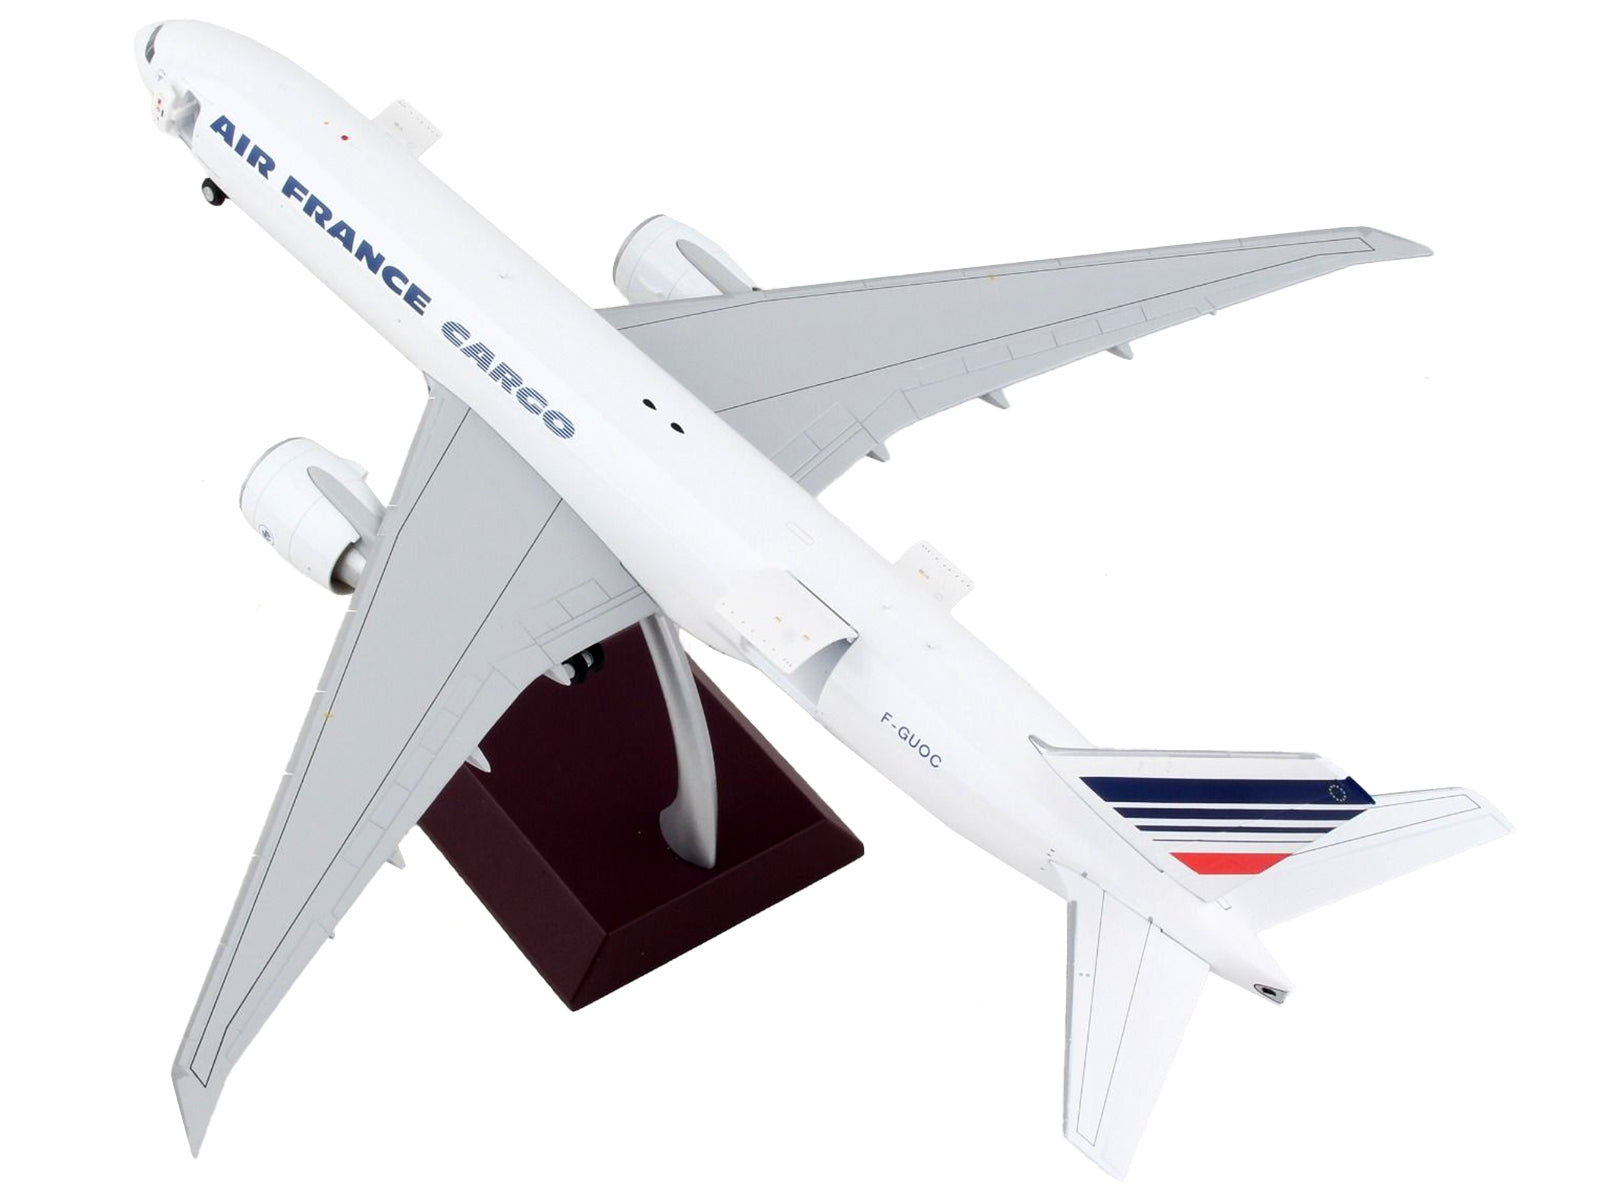 Boeing 777F Commercial Aircraft "Air France Cargo" White with Striped Tail "Gemini 200 - Interactive"